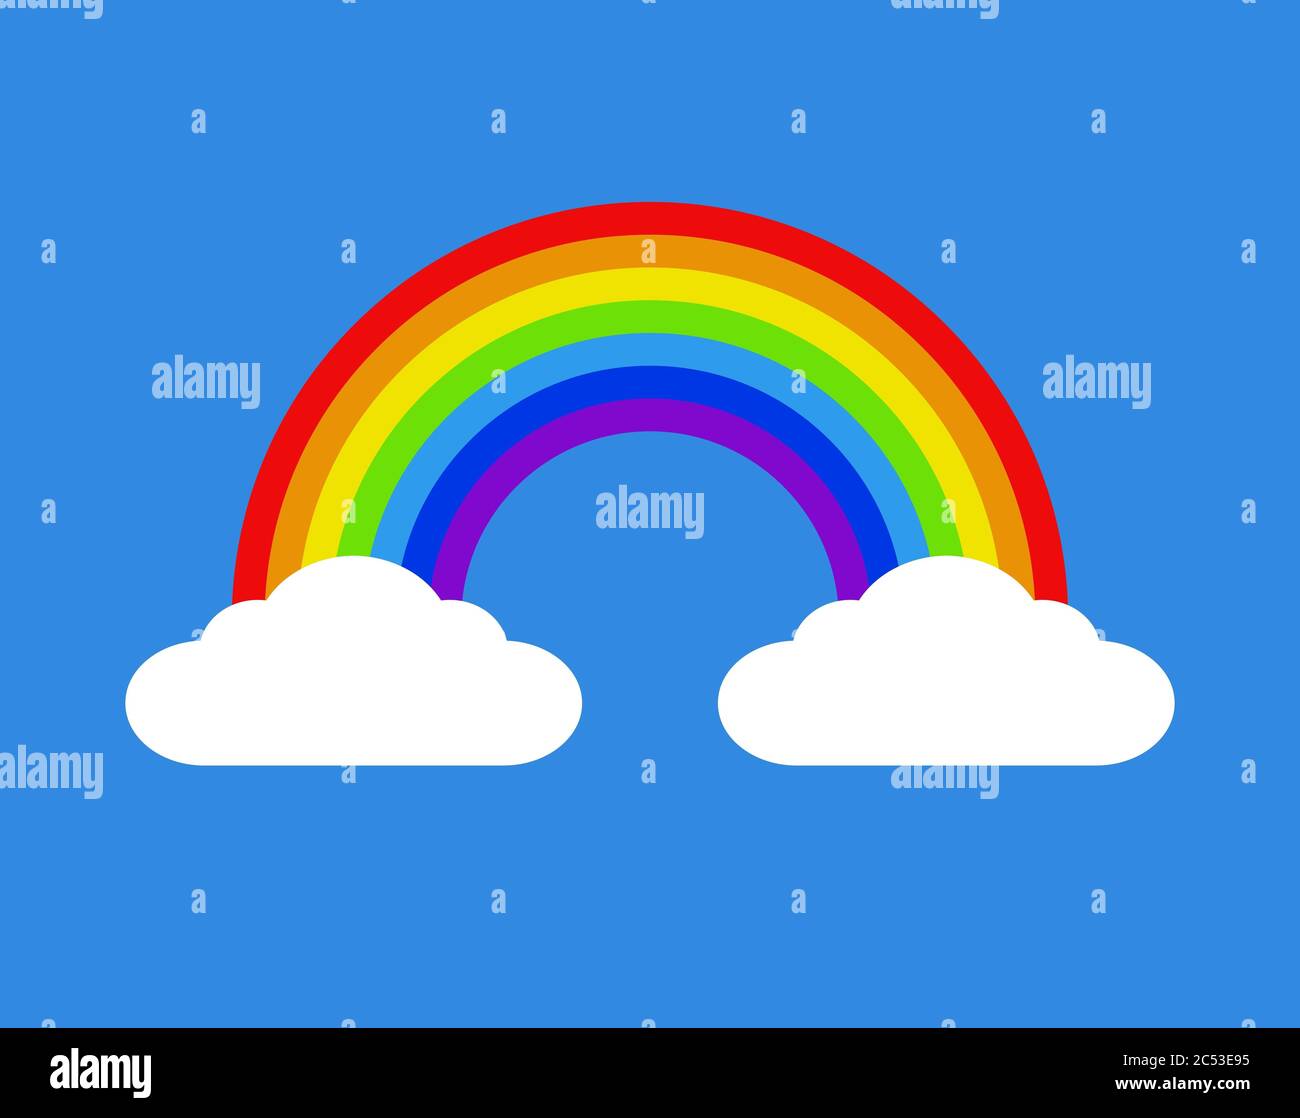 Illustration of a rainbow with clouds on both ends on a blue background Stock Photo